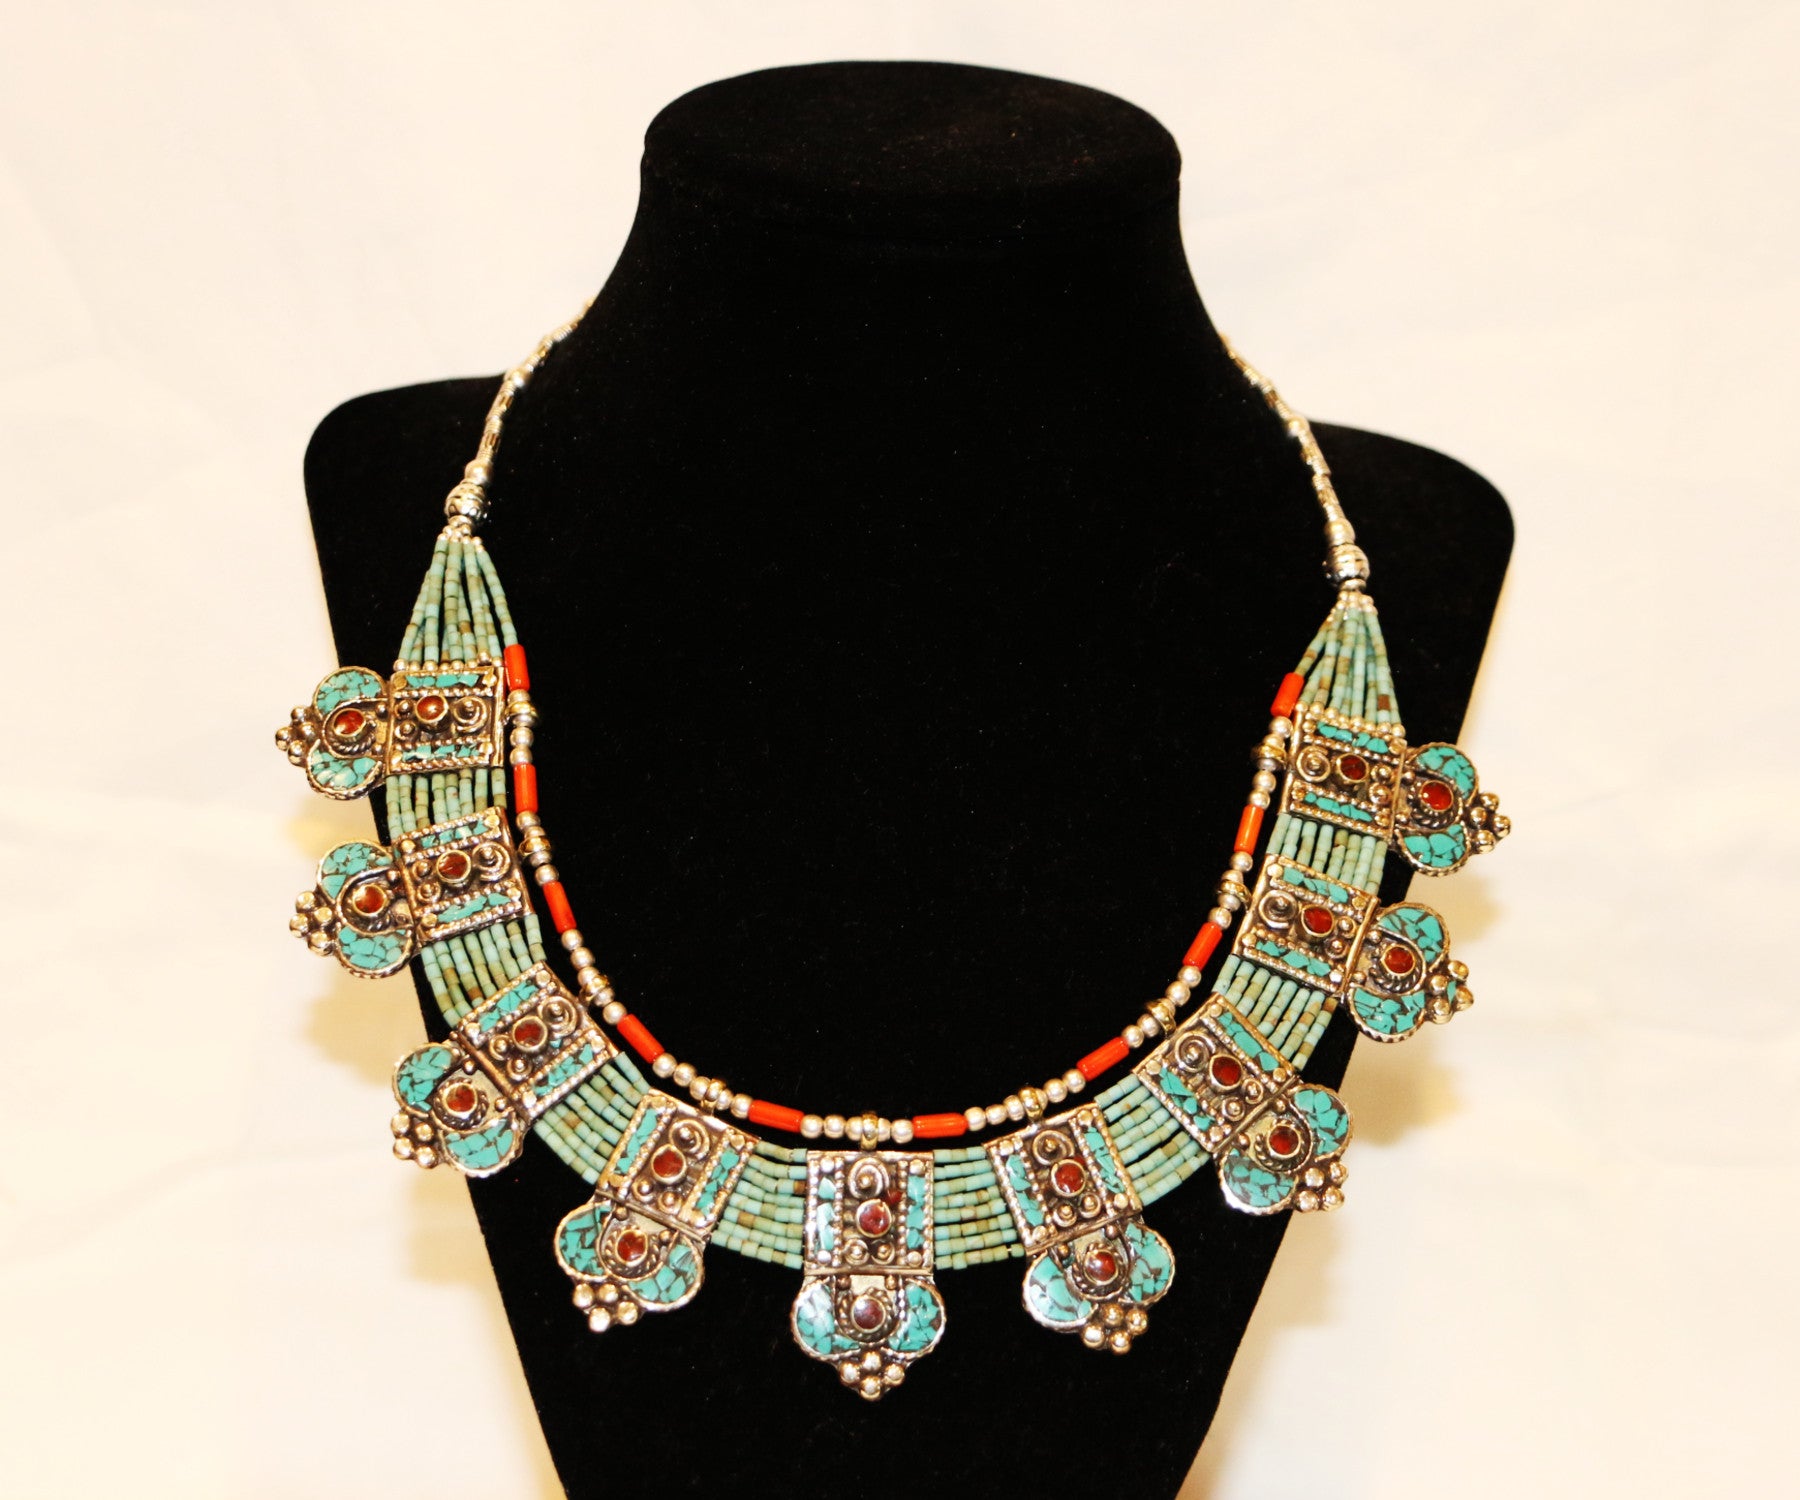 Beautiful Turquoise Coral Necklace - Tibet Arts & Healing